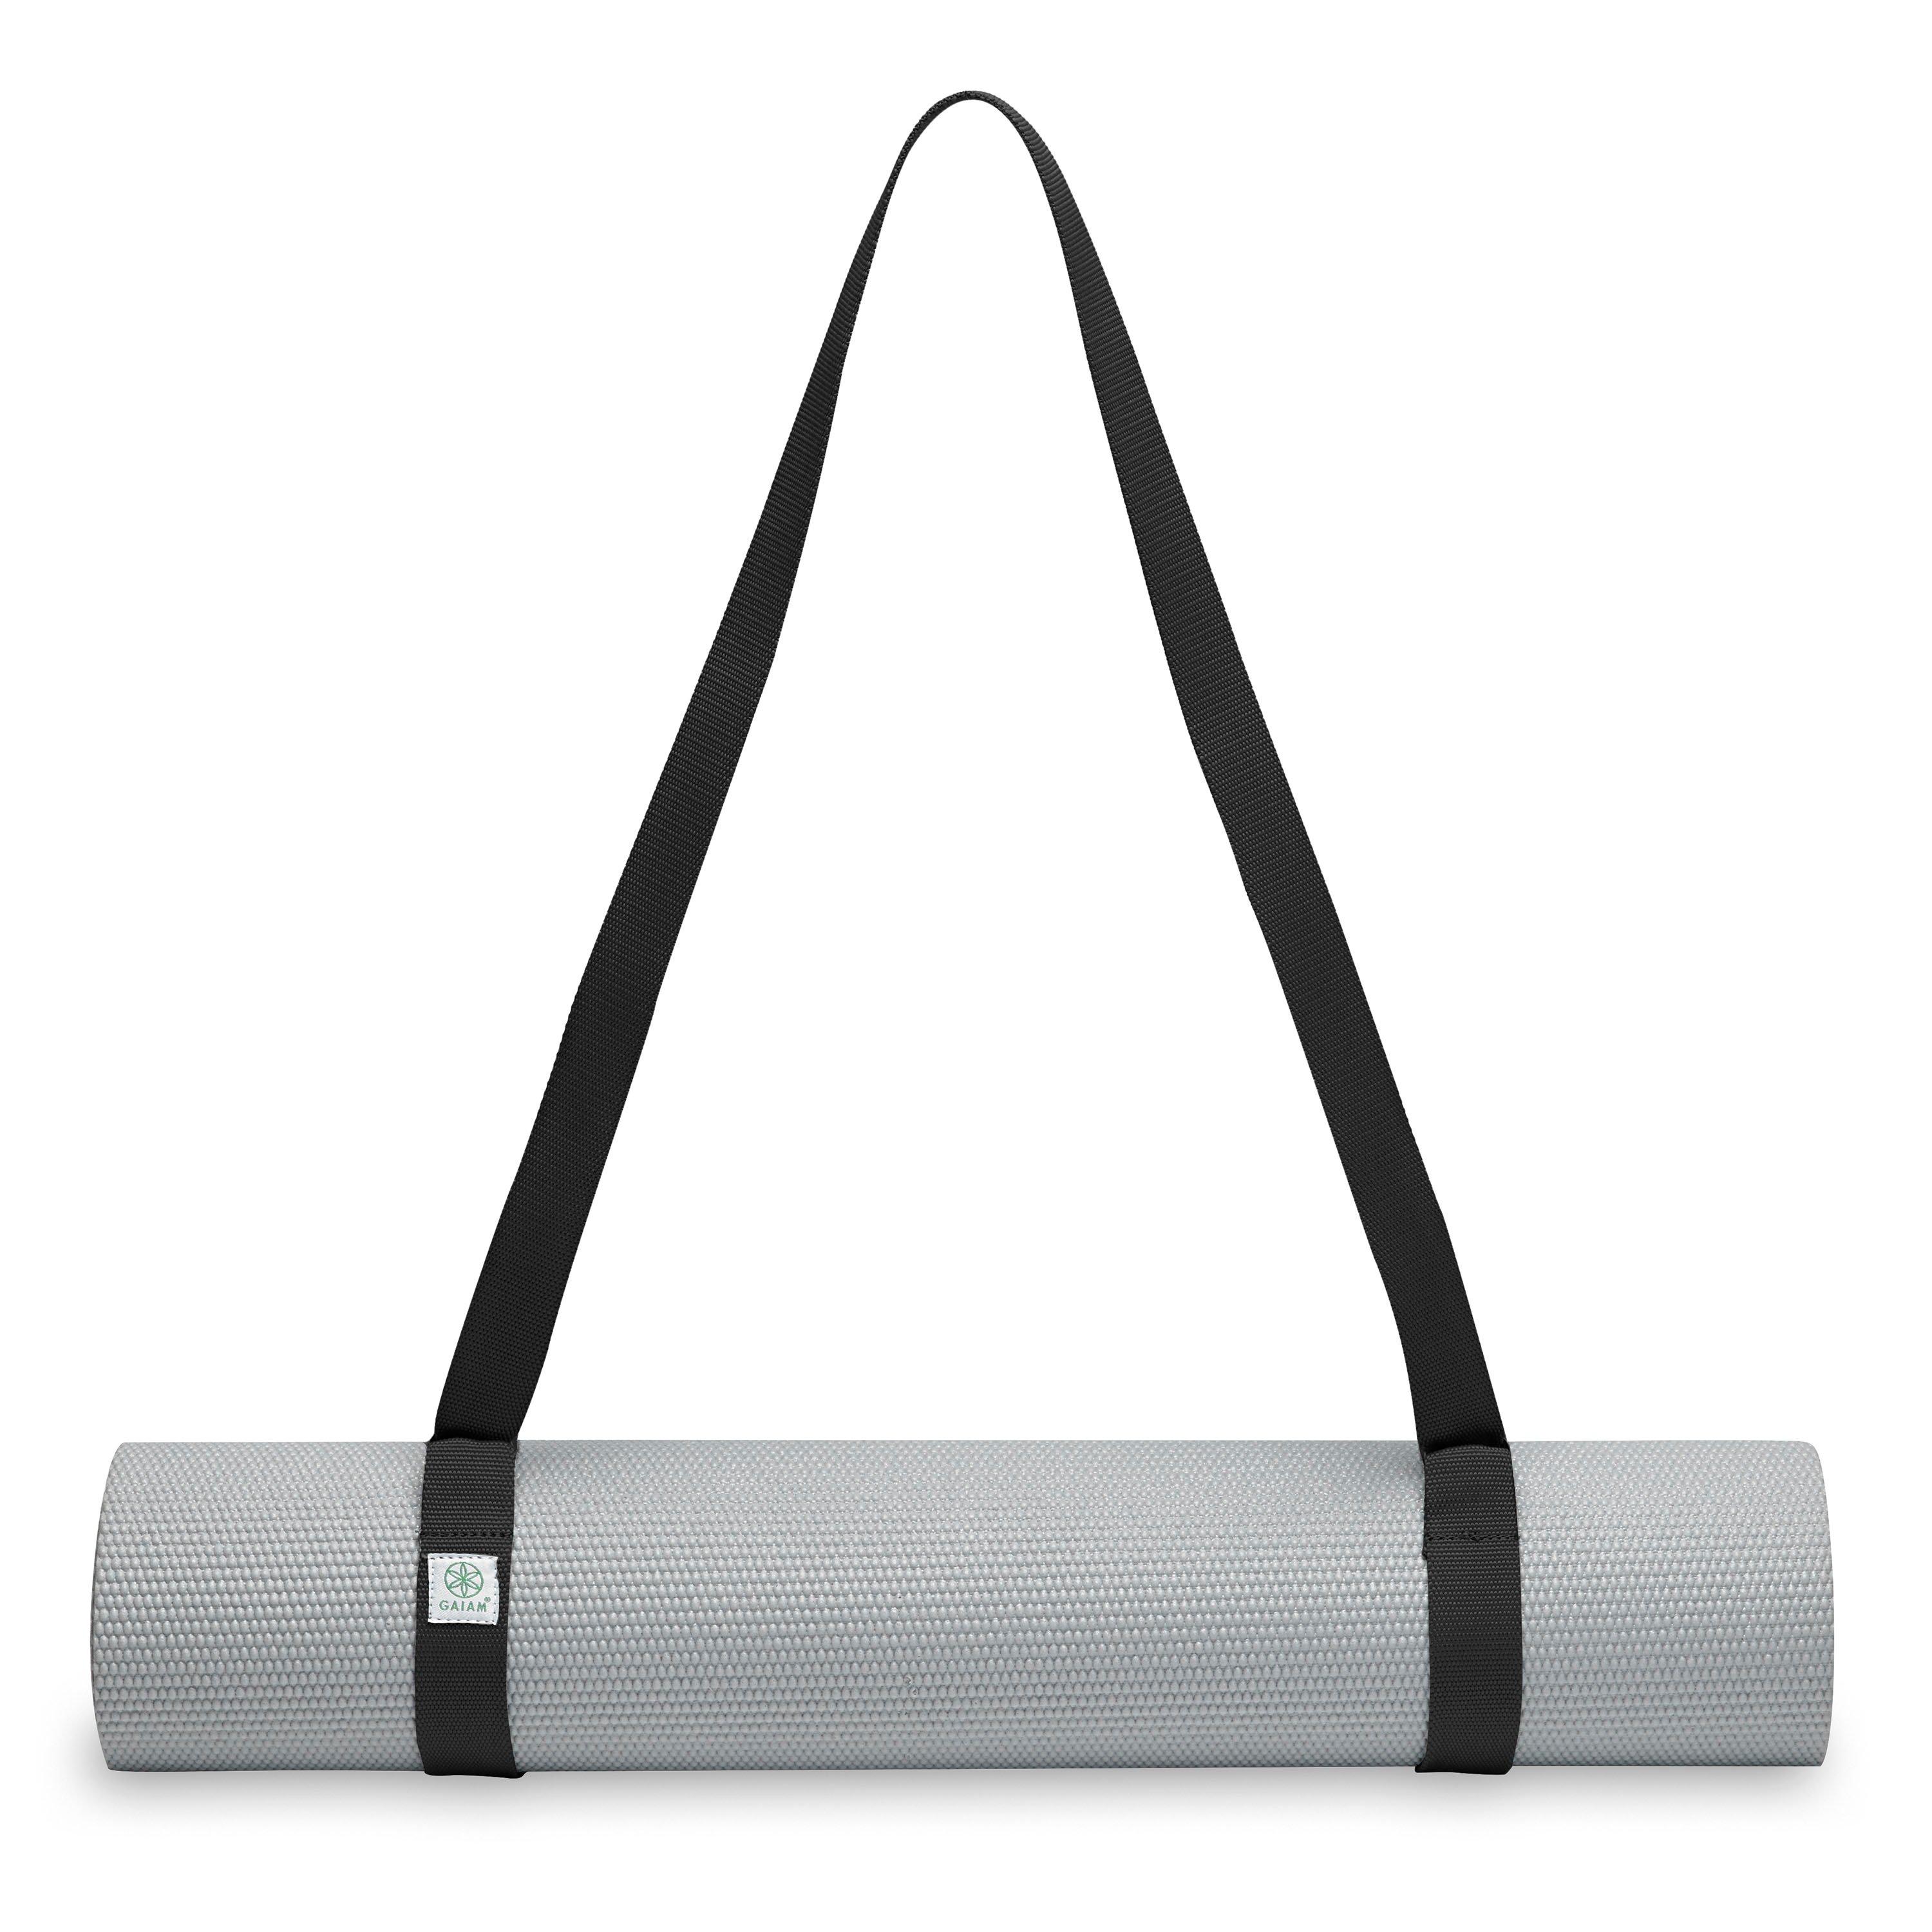 Gaiam On-The-Go Yoga Mat Carrier at